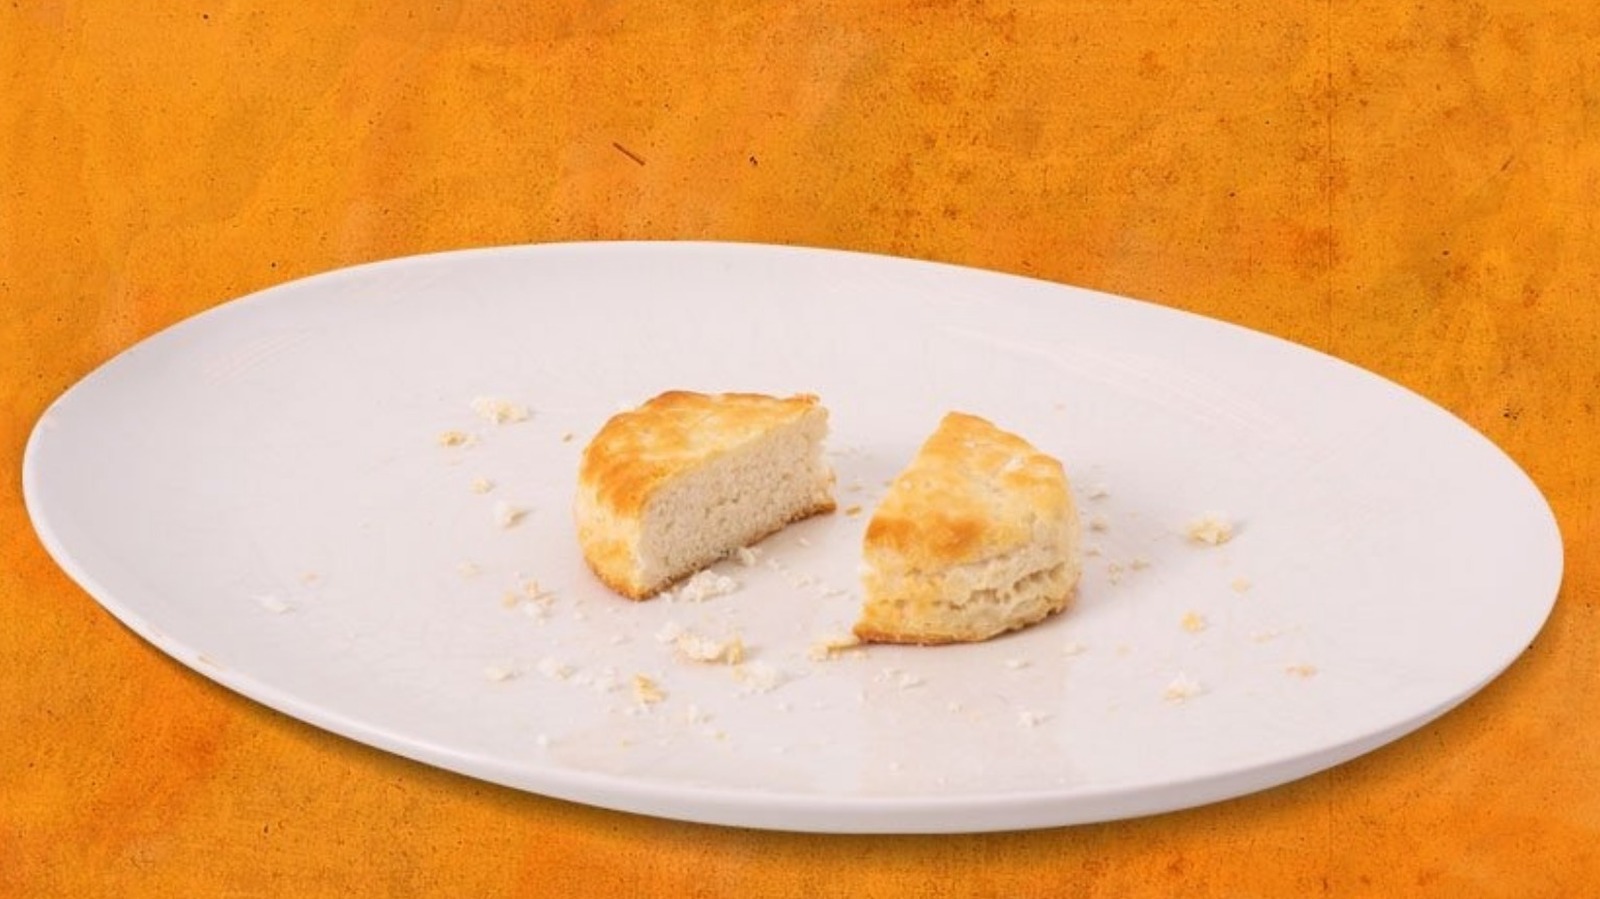 This Is Why Popeyes' Biscuits Are So Delicious